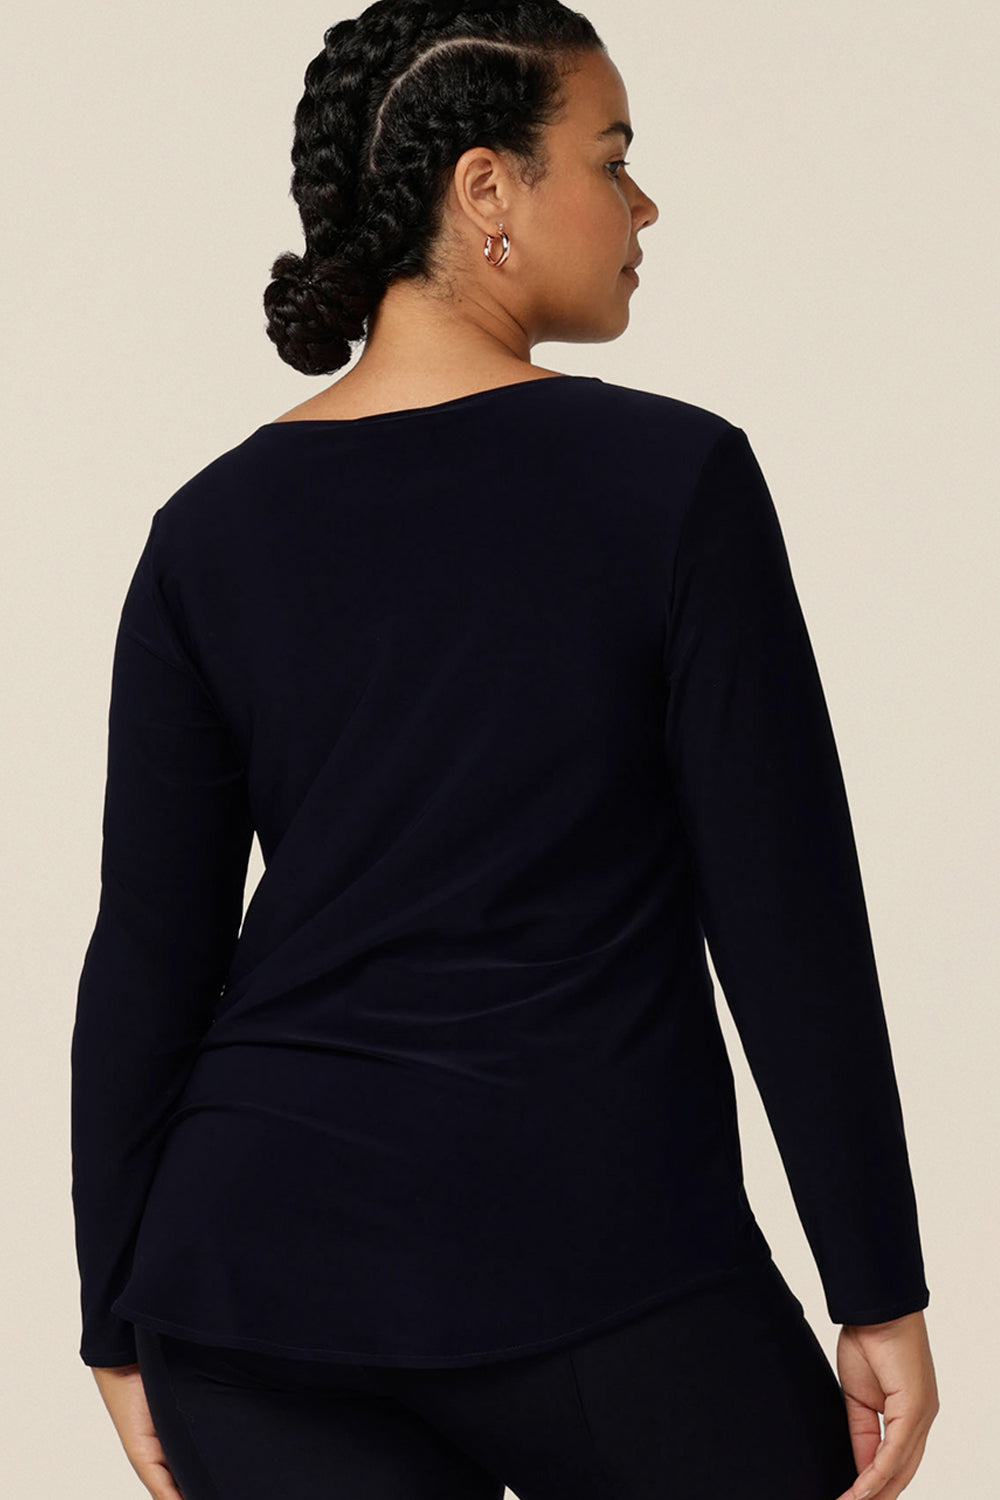 back view of a size 12, curvy woman wearing a boat neck jersey top in navy blue. A good capsule wardrobe basic, this long sleeve navy top is easy to wear for casual or work wear style.